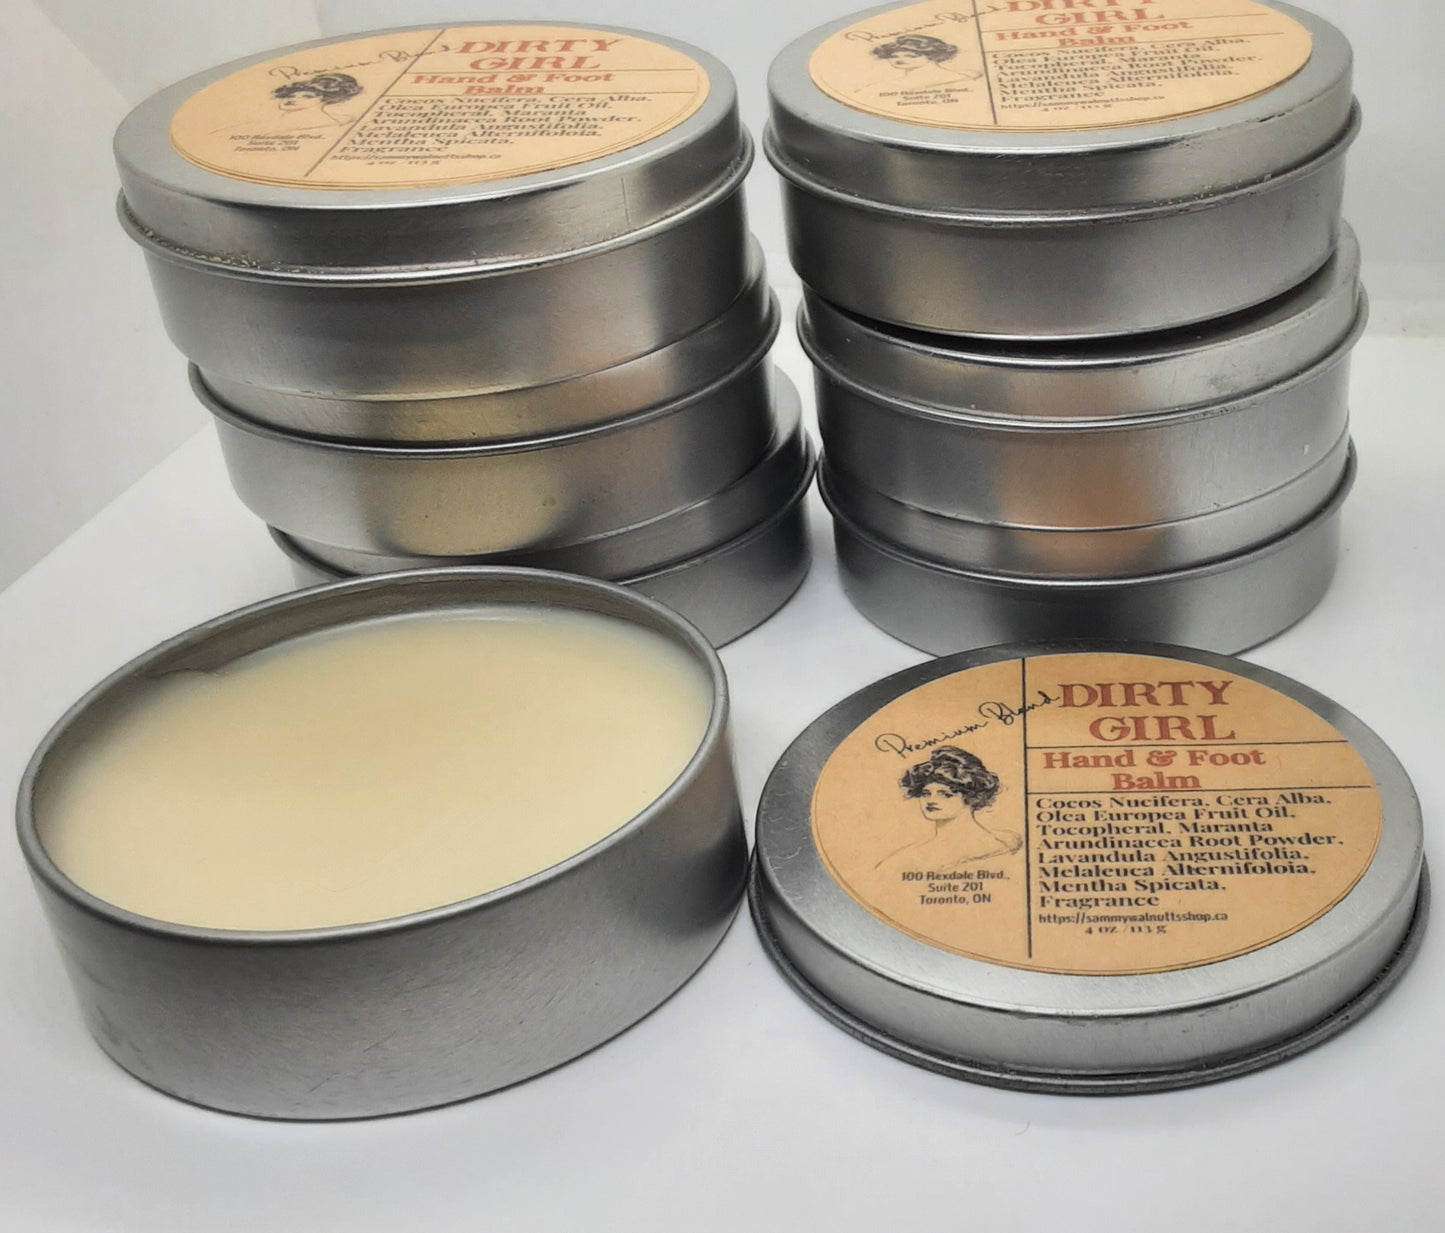 Dirty Girl Hand and Foot Balm